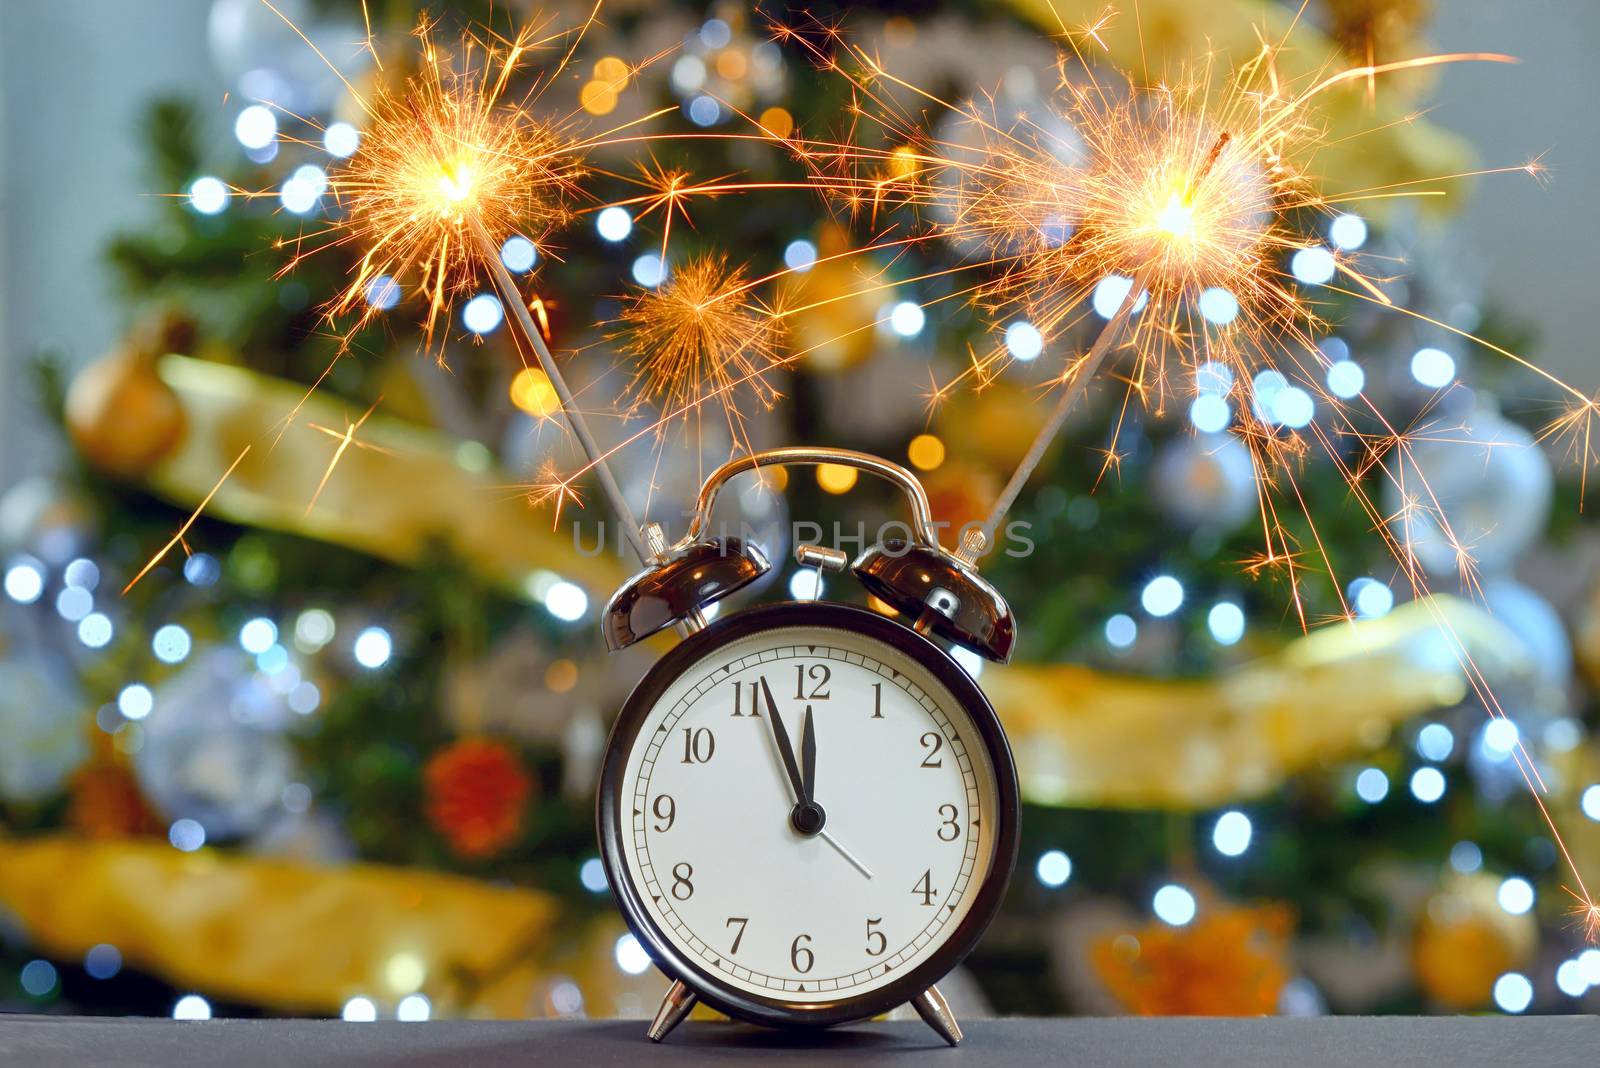 Happy New Year concept with Sparkler Fireworks and clock